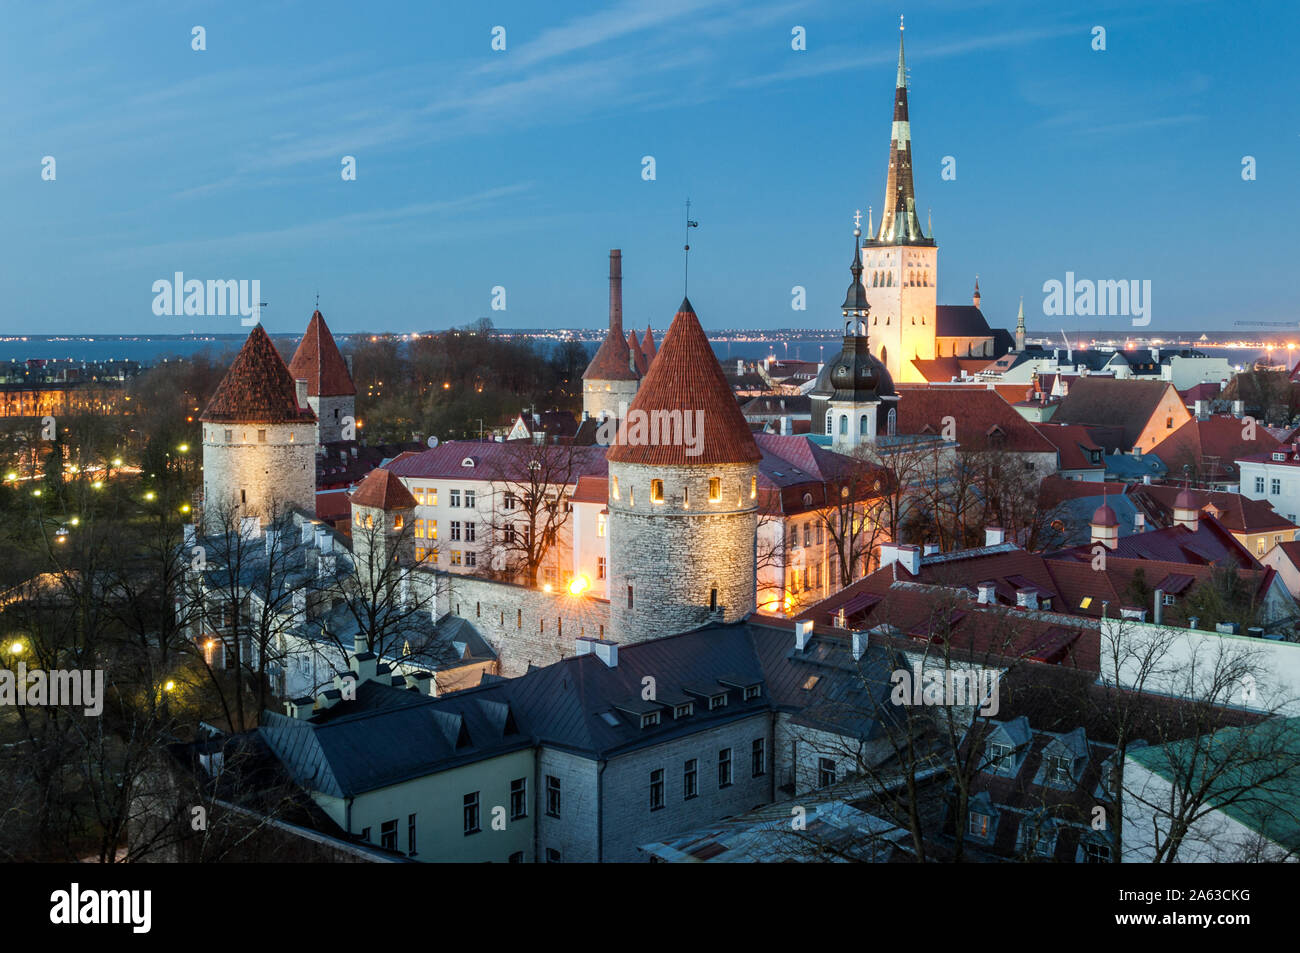 View of Tallinn old town at night Stock Photo